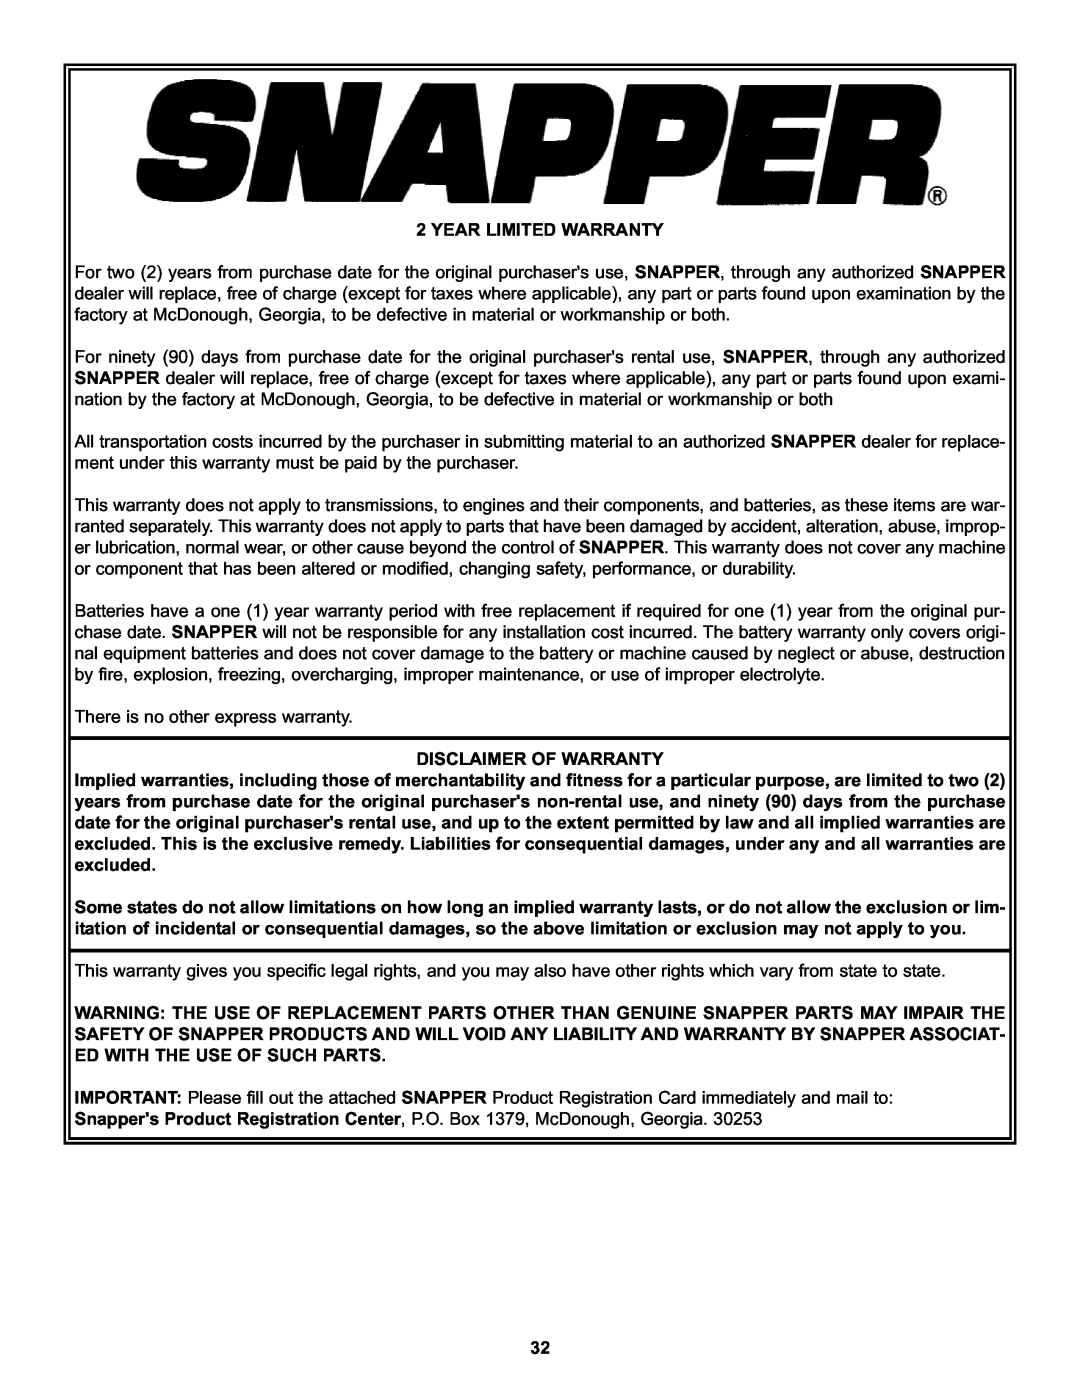 Snapper CZT19481KWV important safety instructions Year Limited Warranty, Disclaimer Of Warranty 